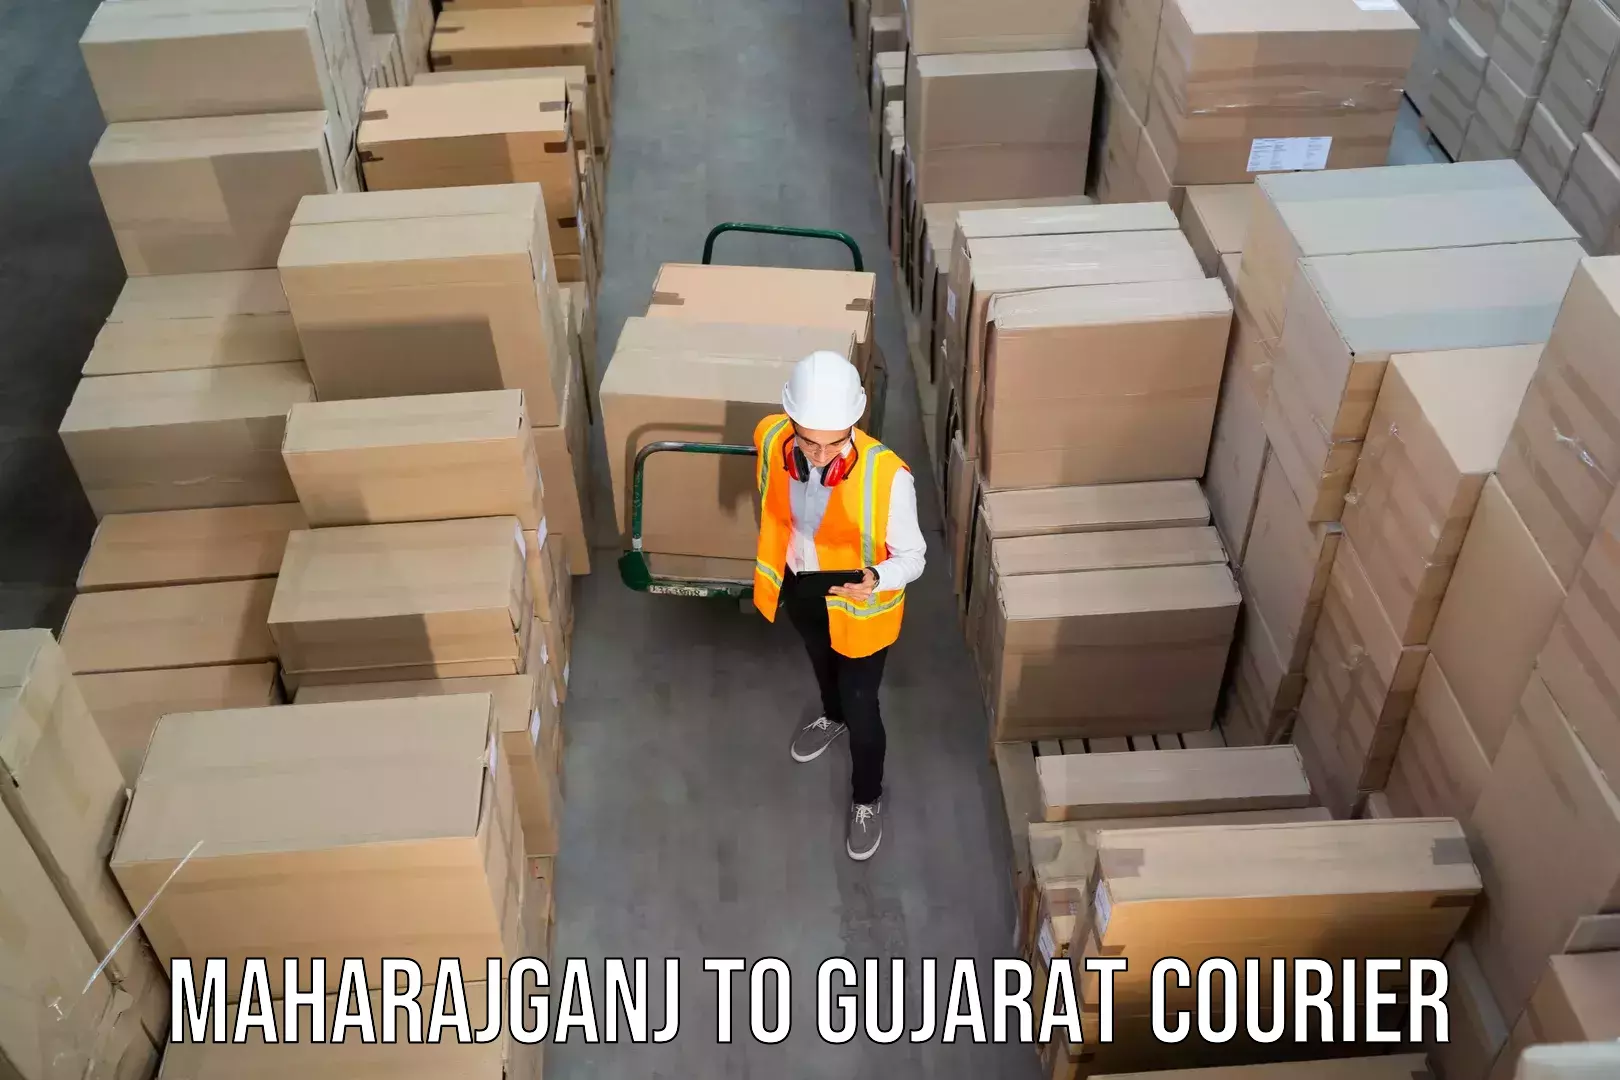 Subscription-based courier Maharajganj to Ahmedabad